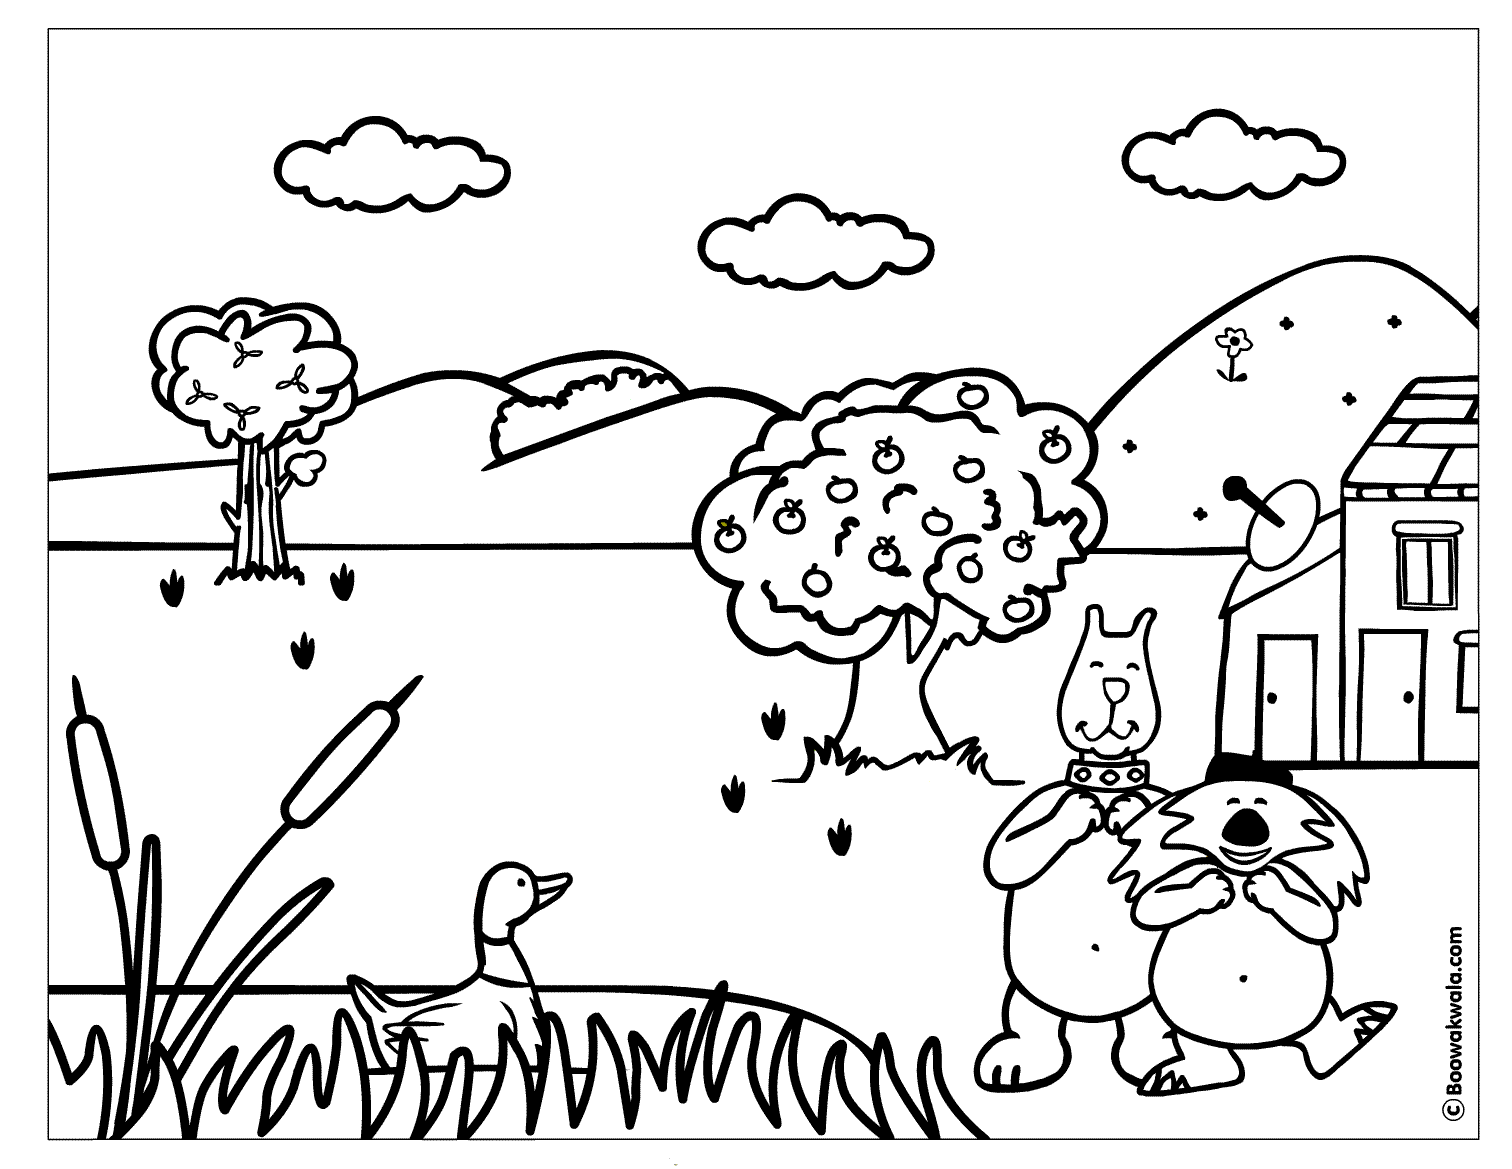 Coloring Book / page / picture / sheet